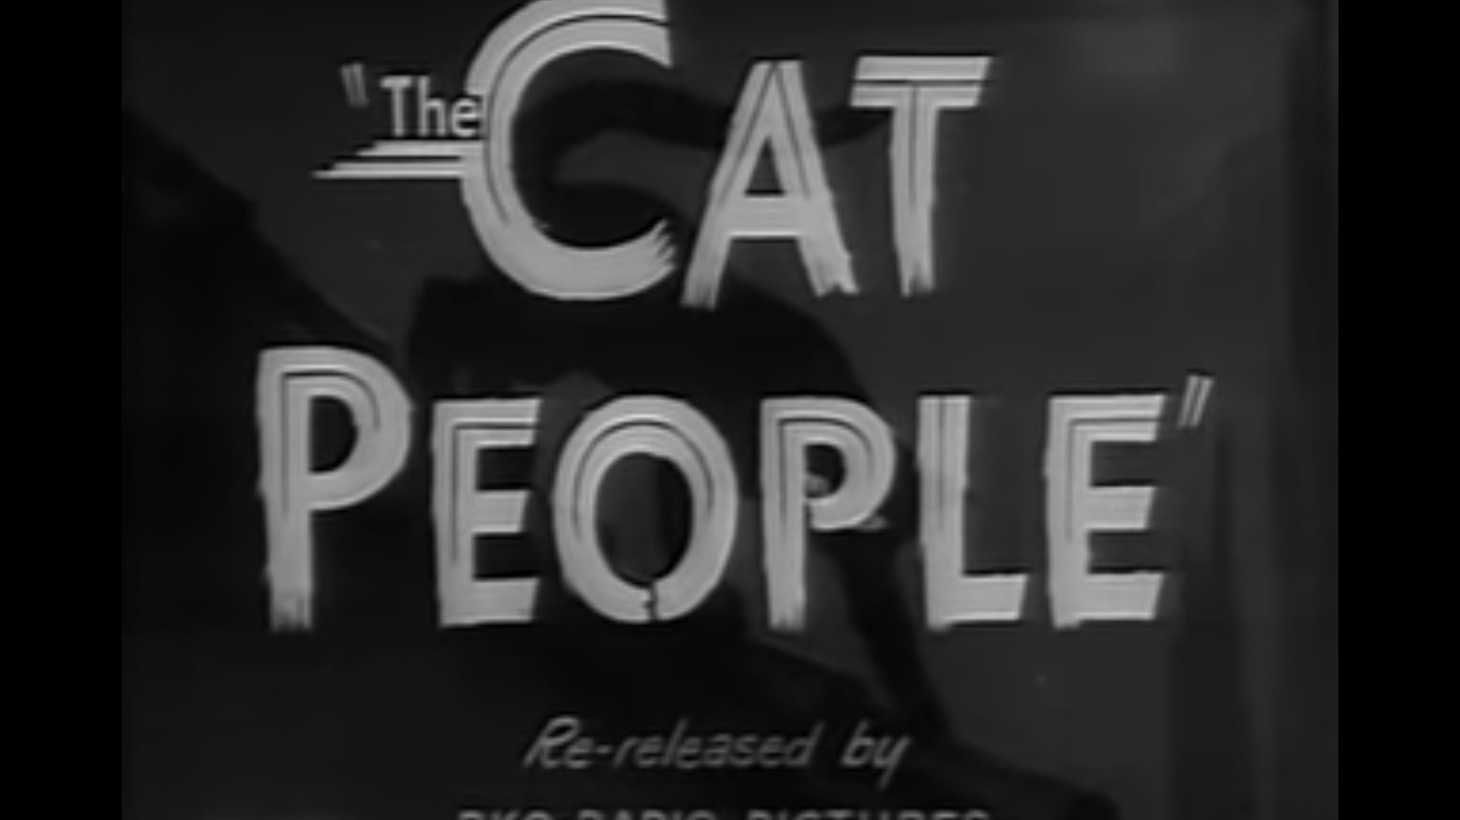 “When this movie originally came out, the general vibe was, ‘Oh, it's so scary that this woman is so unavailable and mysterious. And oh, will this guy survive having married this horrible ice queen?’ Well nowadays … this is actually a really potent queer analog,” film critic William Bibbiani says of “Cat People.”